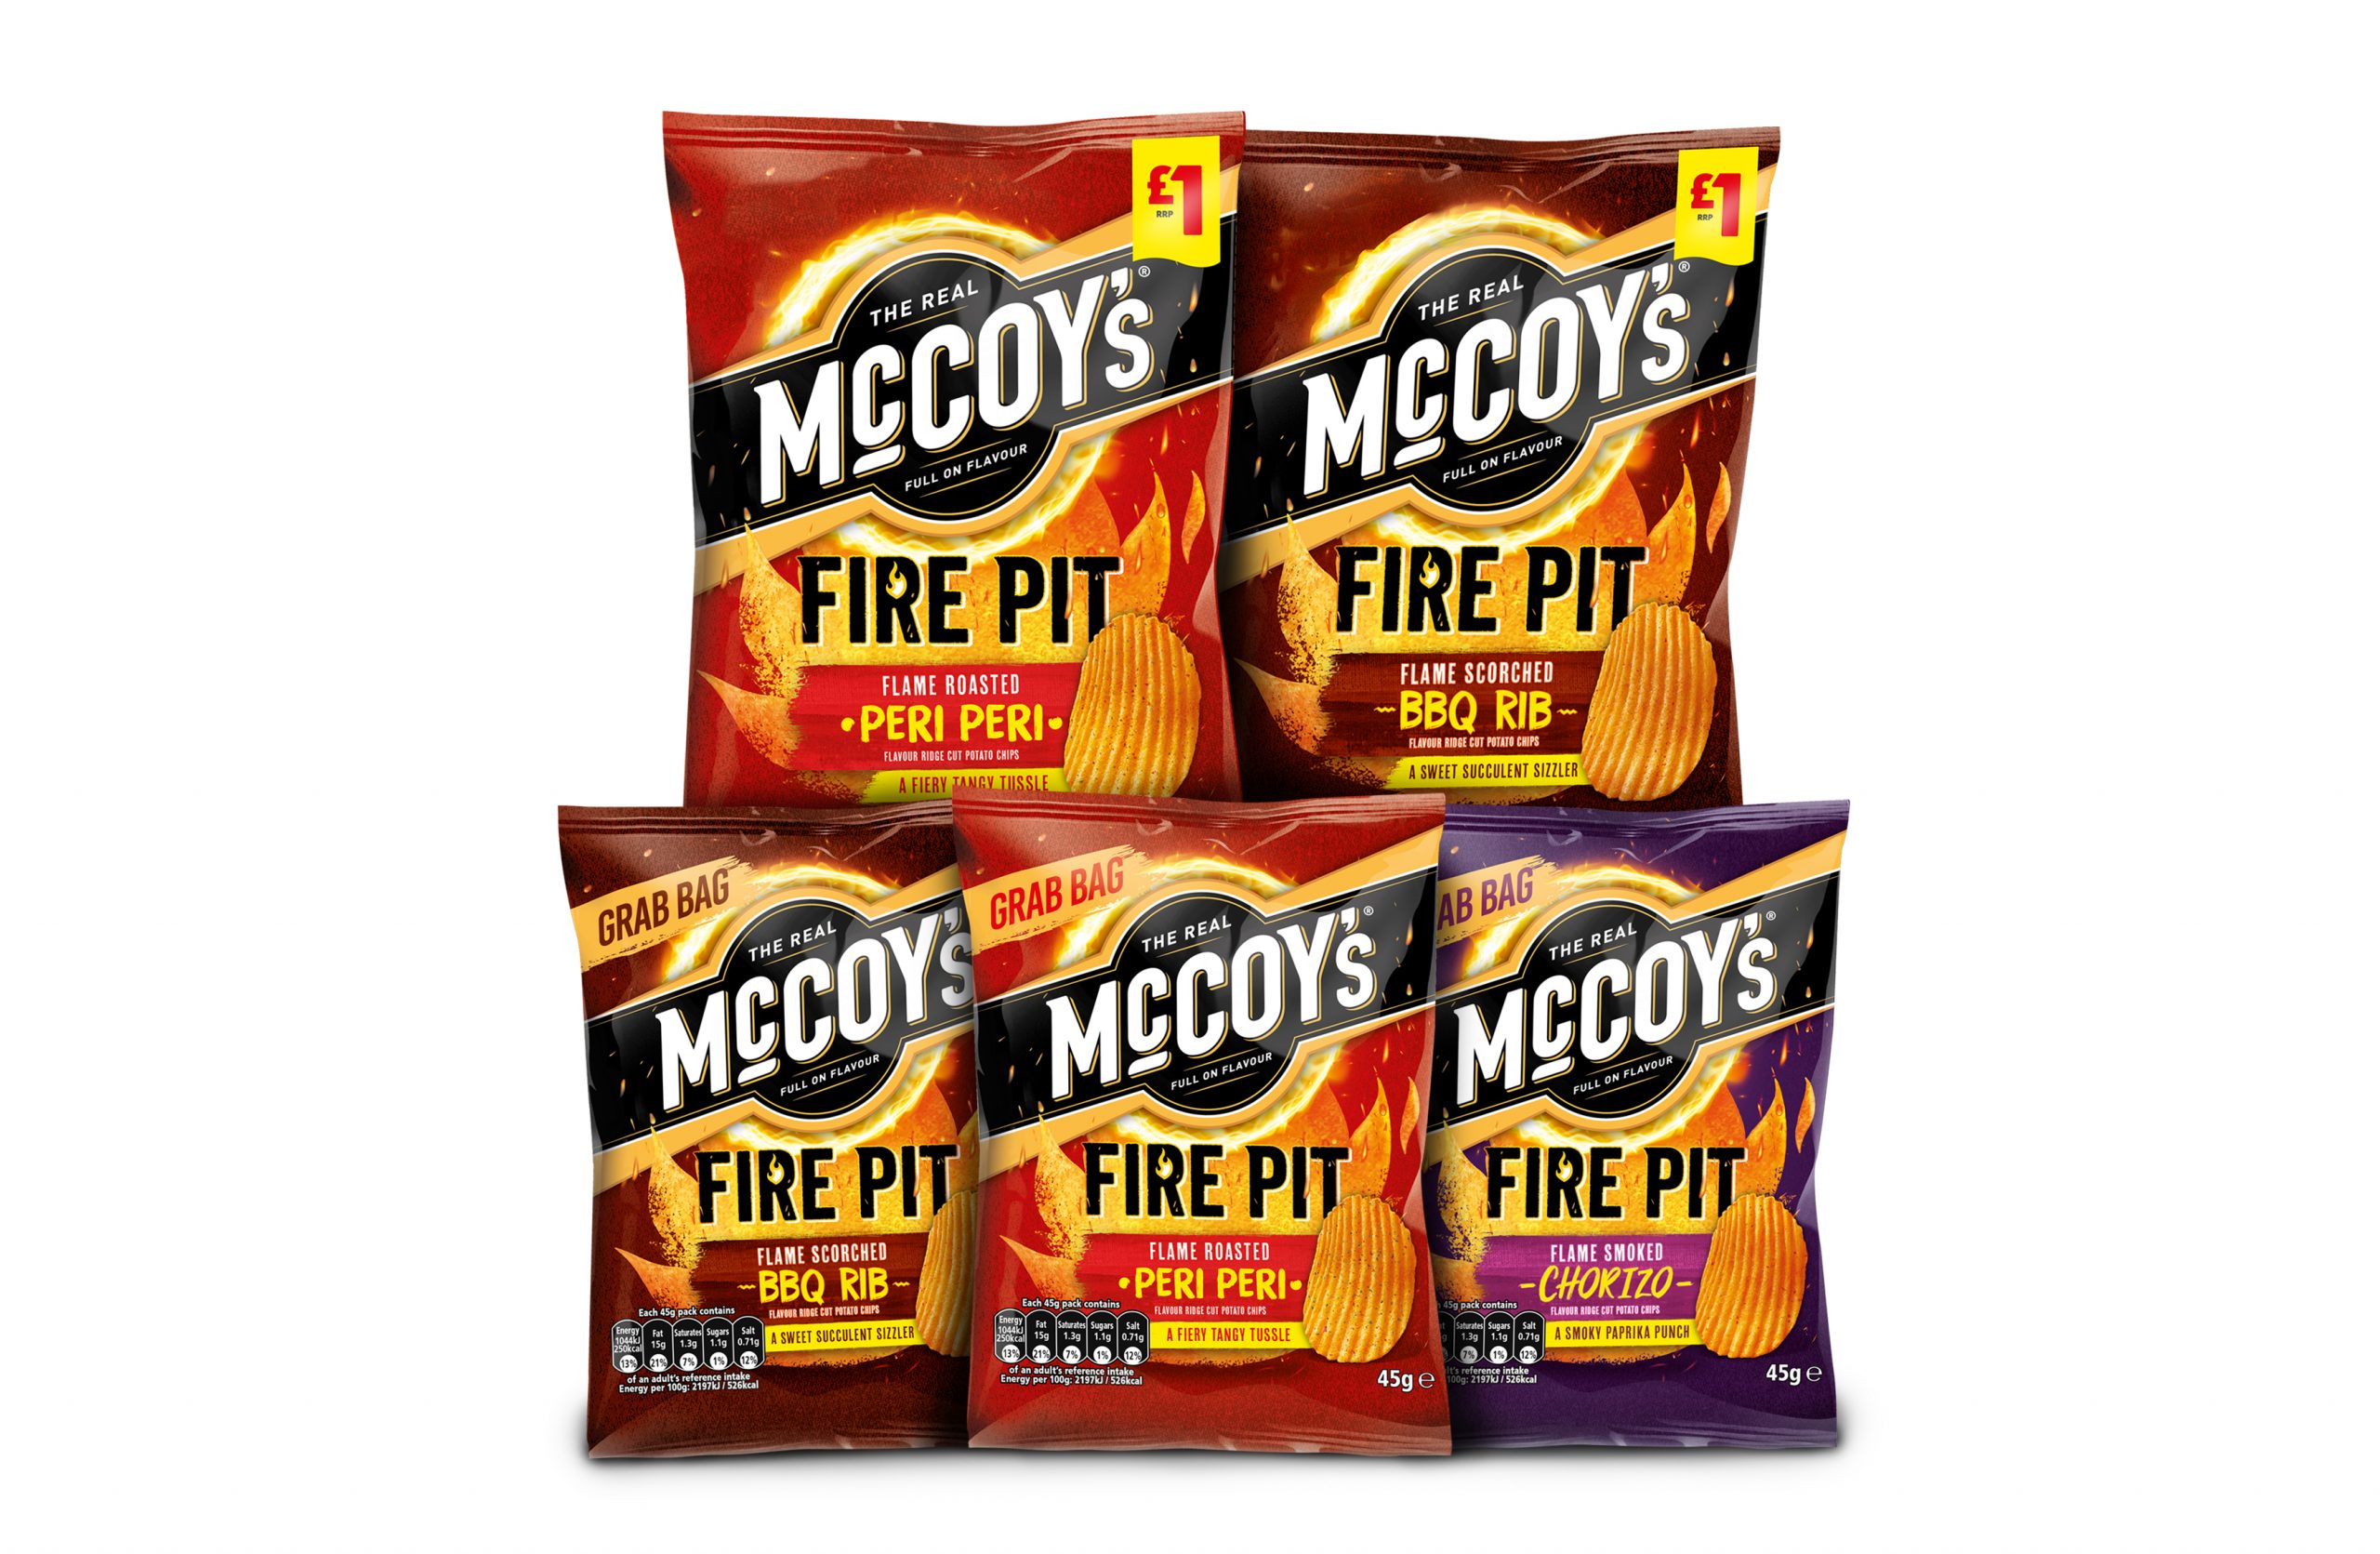 KP Snacks unleashes the beast with new McCoy’s creative